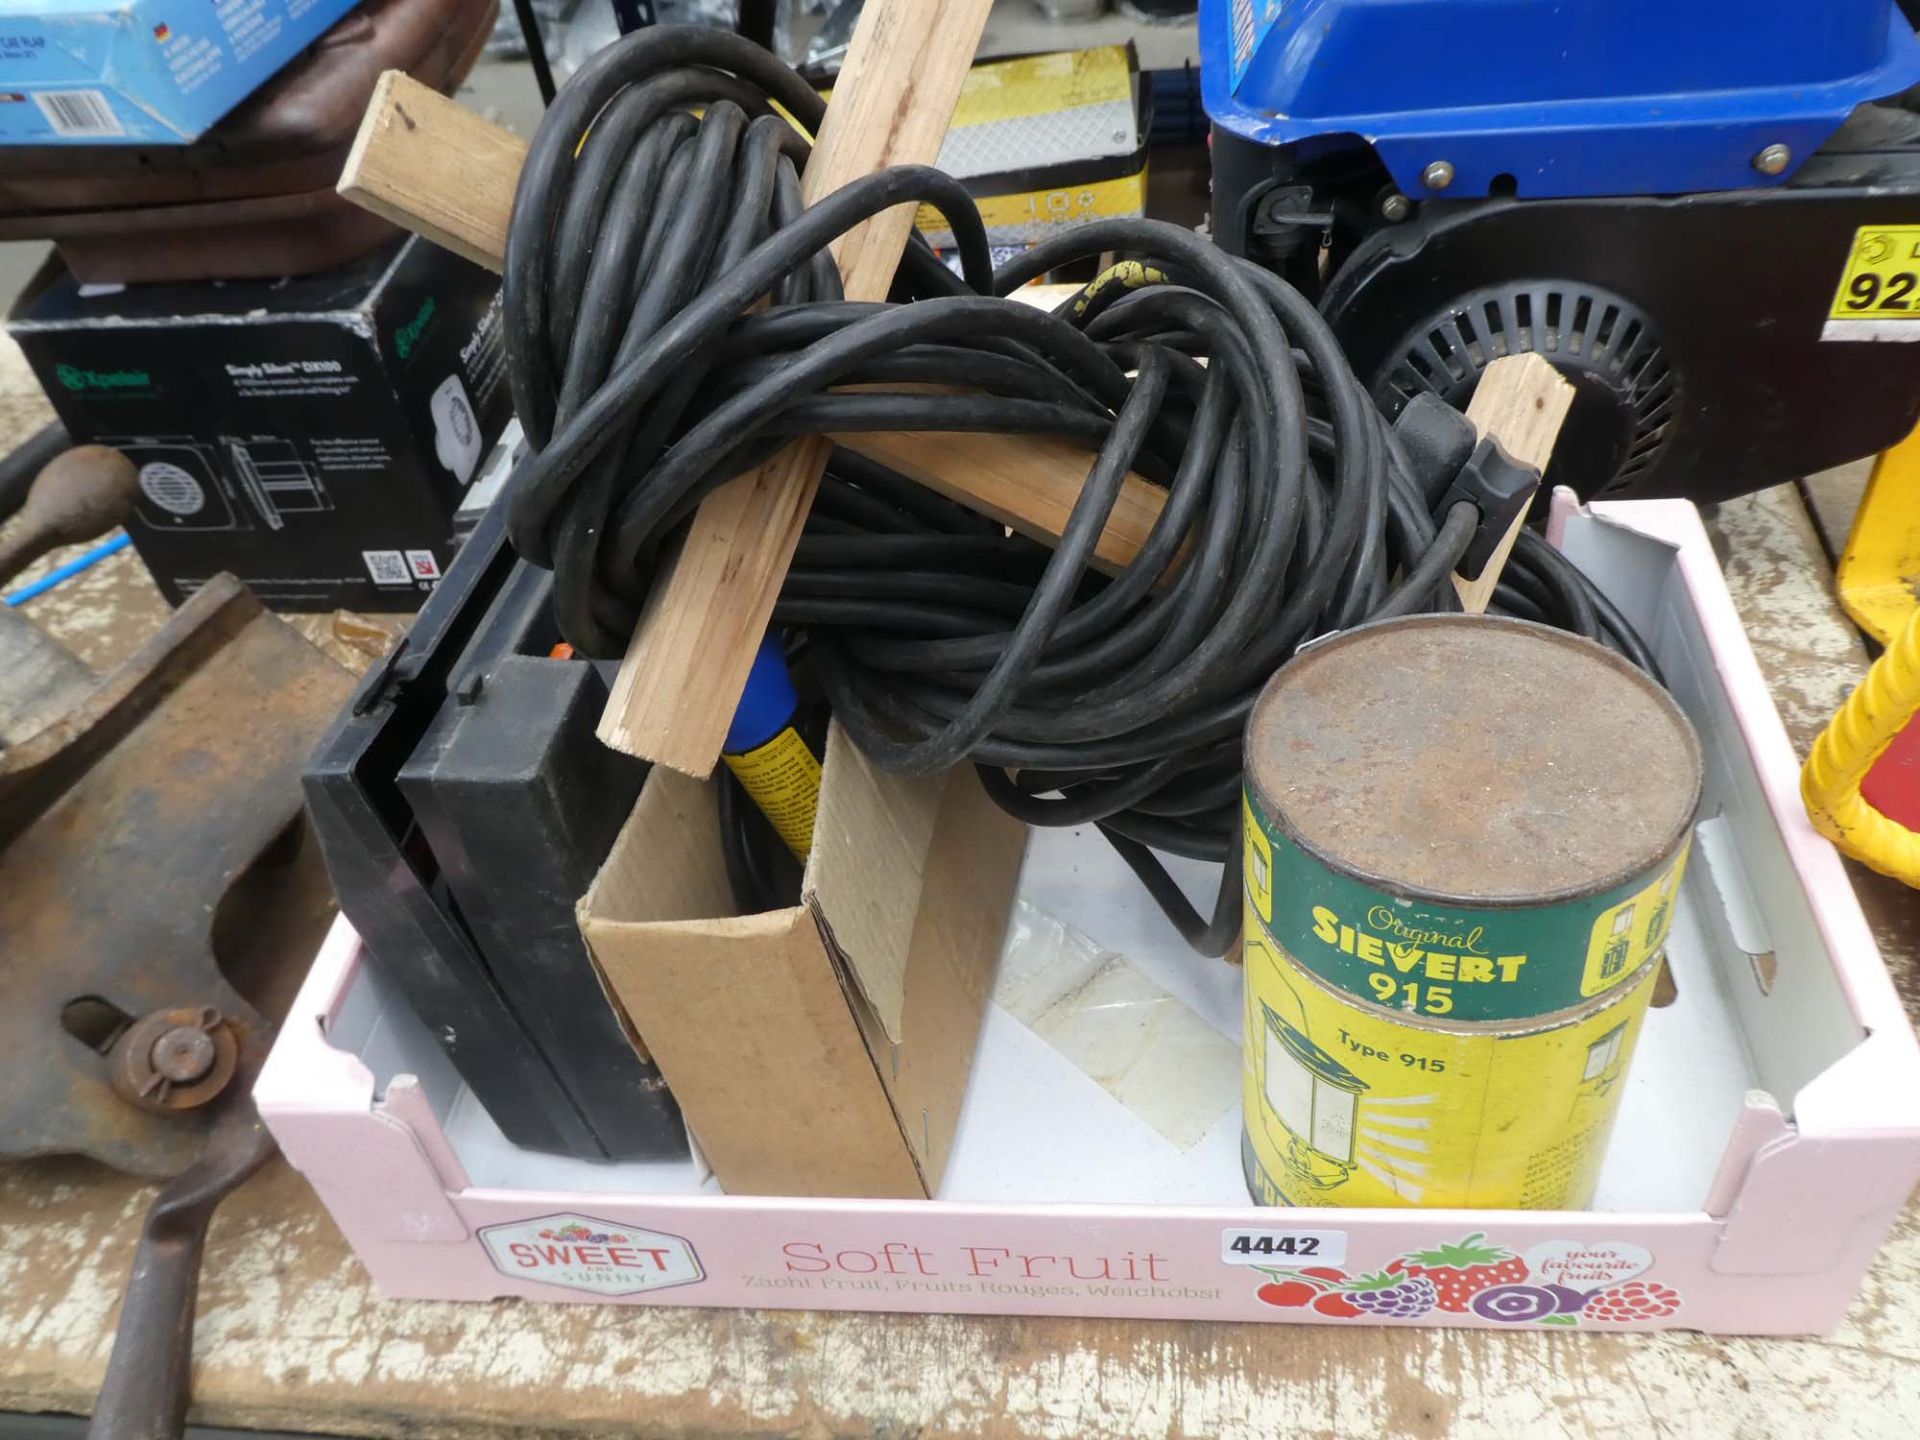 Box containing extension cable, lamp, arc spot gun and blow lamp